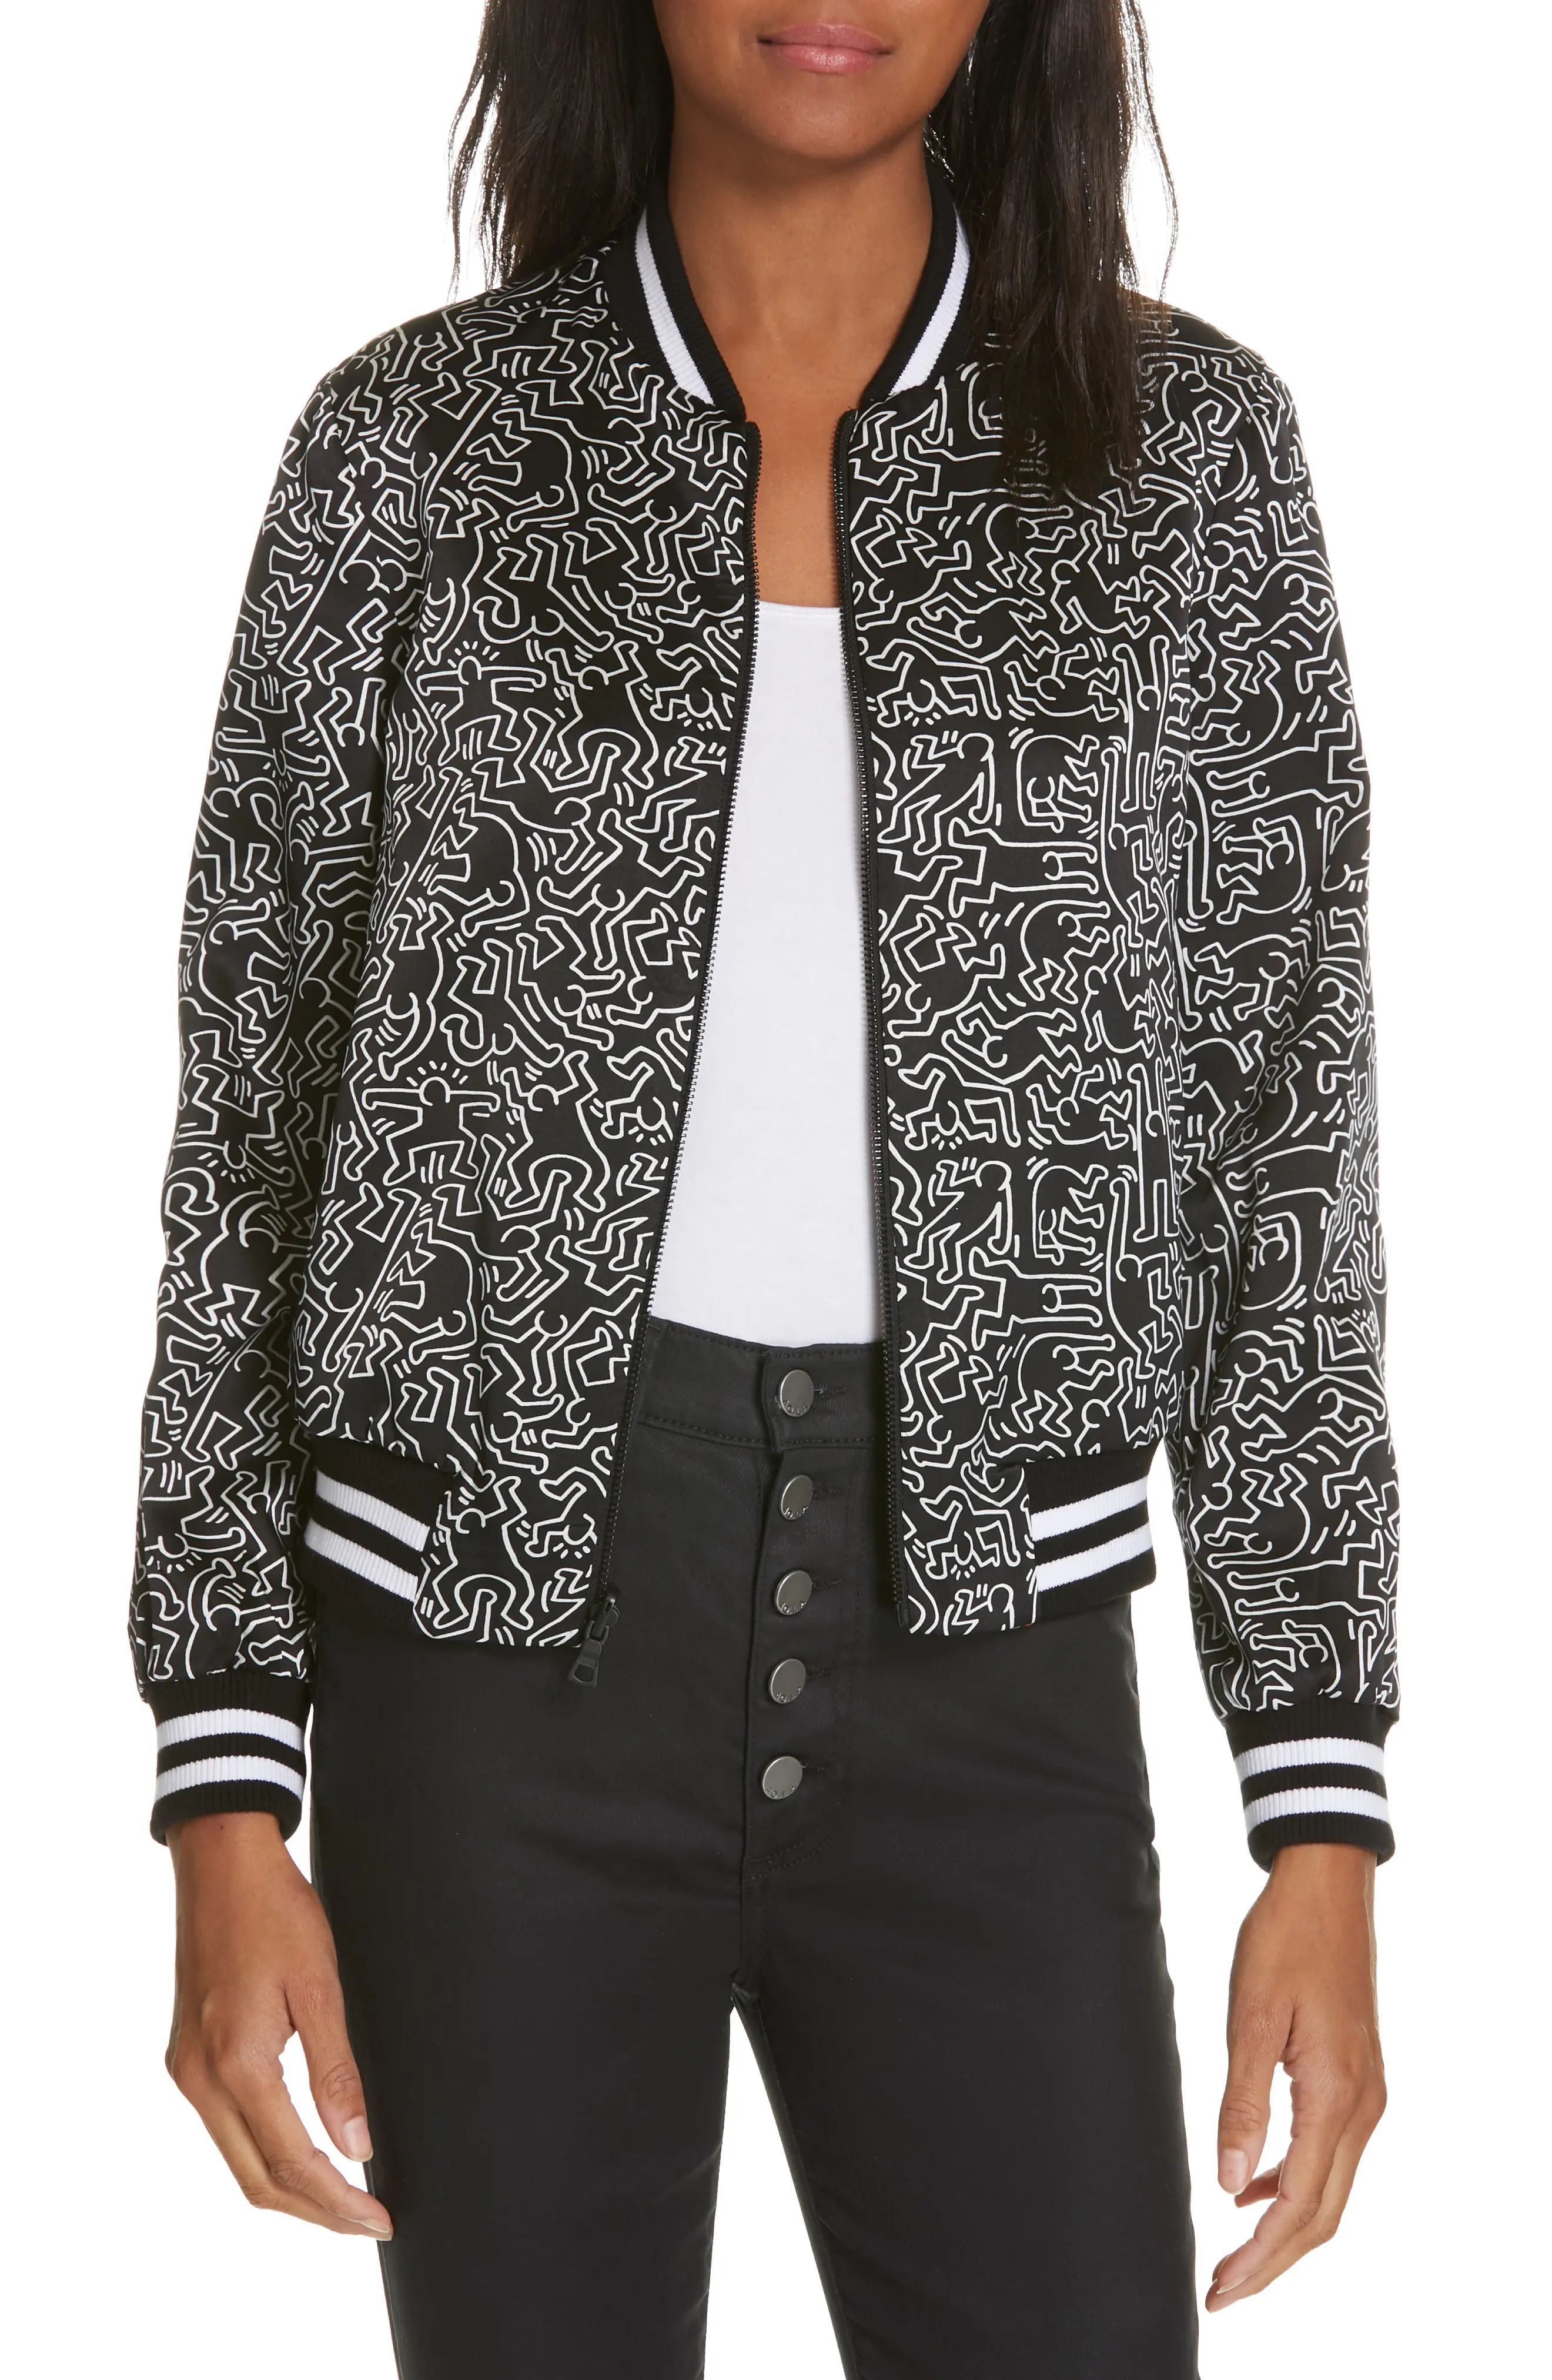 Alice + Olivia x Keith Haring Lonnie Reversible Bomber Jacket | Nordstrom